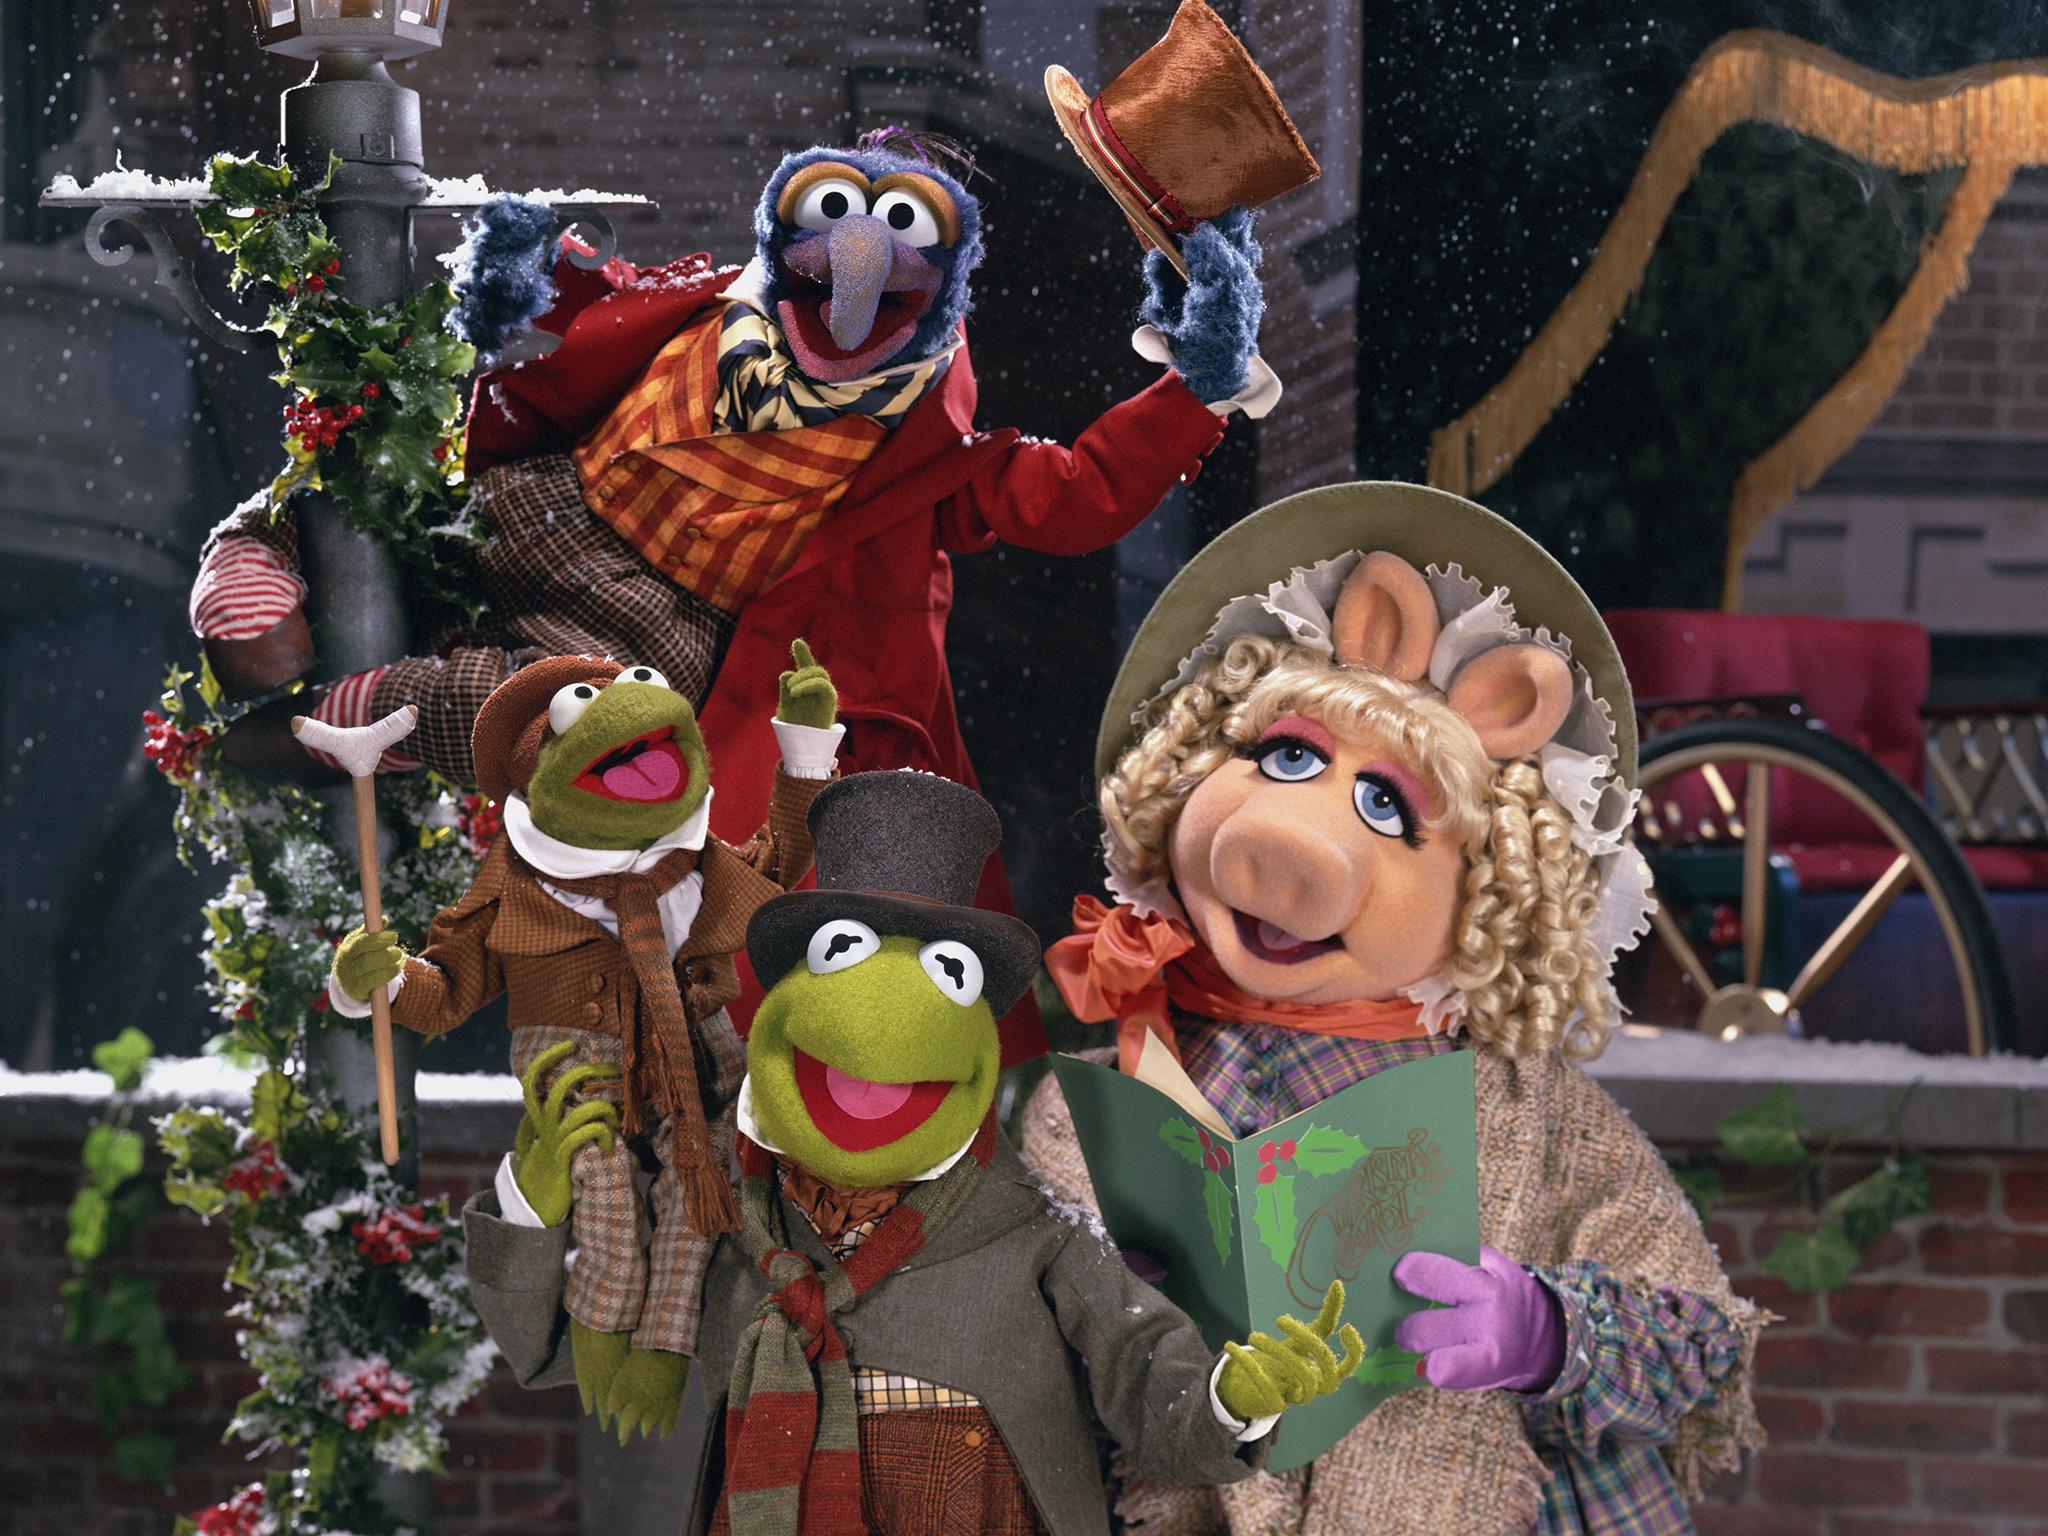 Gonzo, Kermit and Miss Piggy in The Muppet Christmas Carol